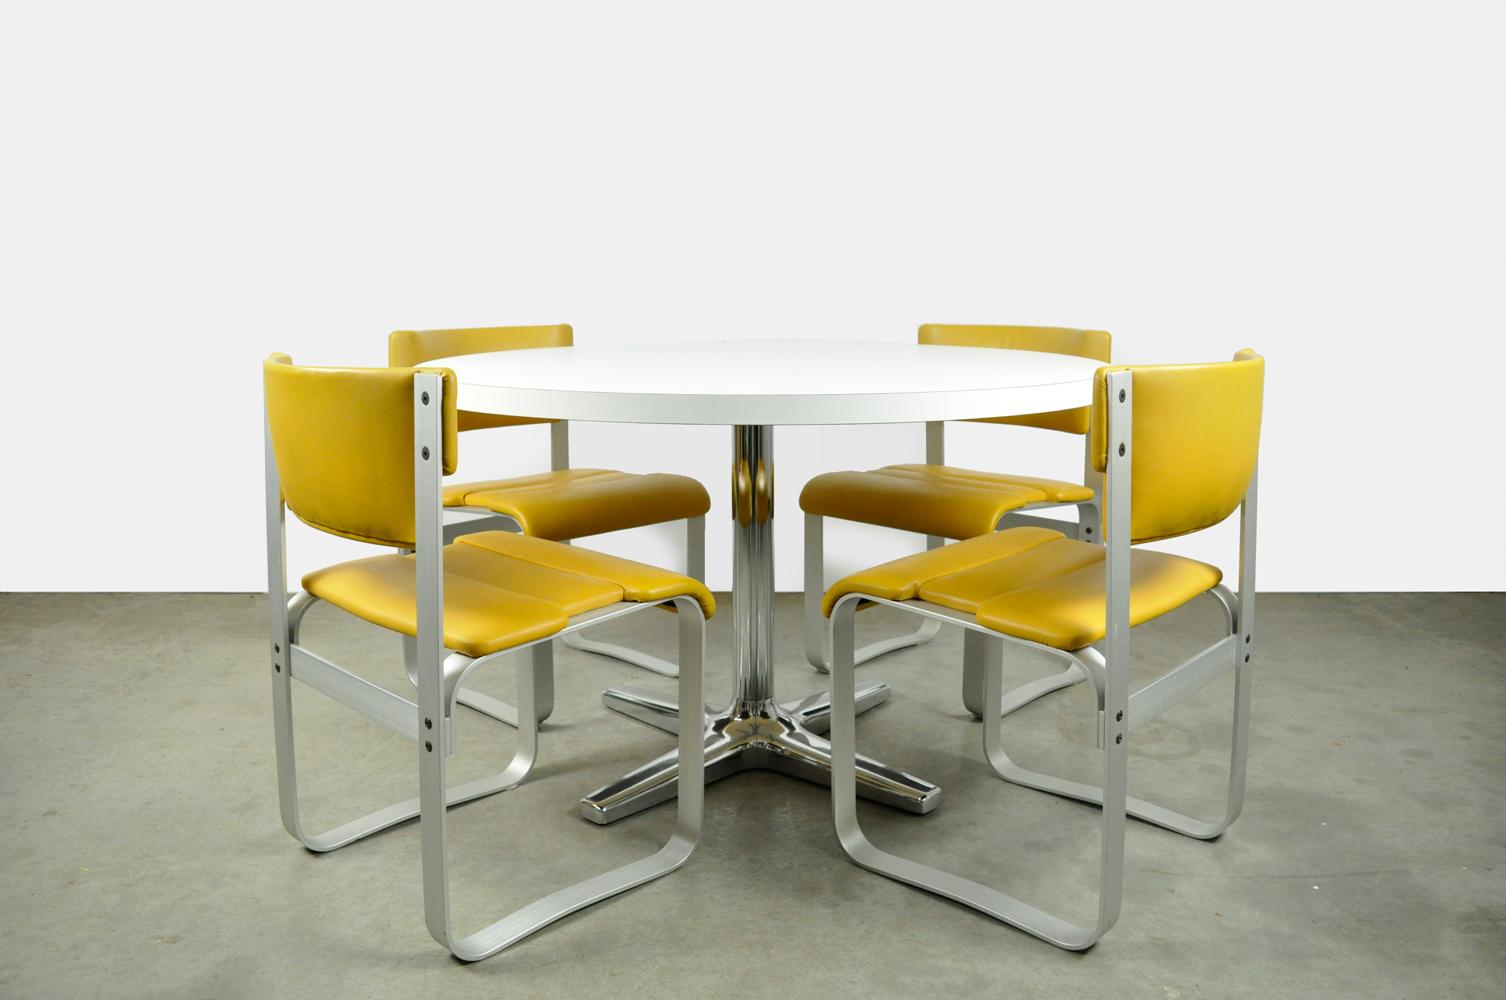 combined dining table set by Asko / Ilmari Lappalainen and Pastoe from the 60s and 70s. The “Pulkka” chairs are made of anodized aluminum with yellow leatherette upholstery and the round table has a white melamine top and a chromed base. 
dimensions